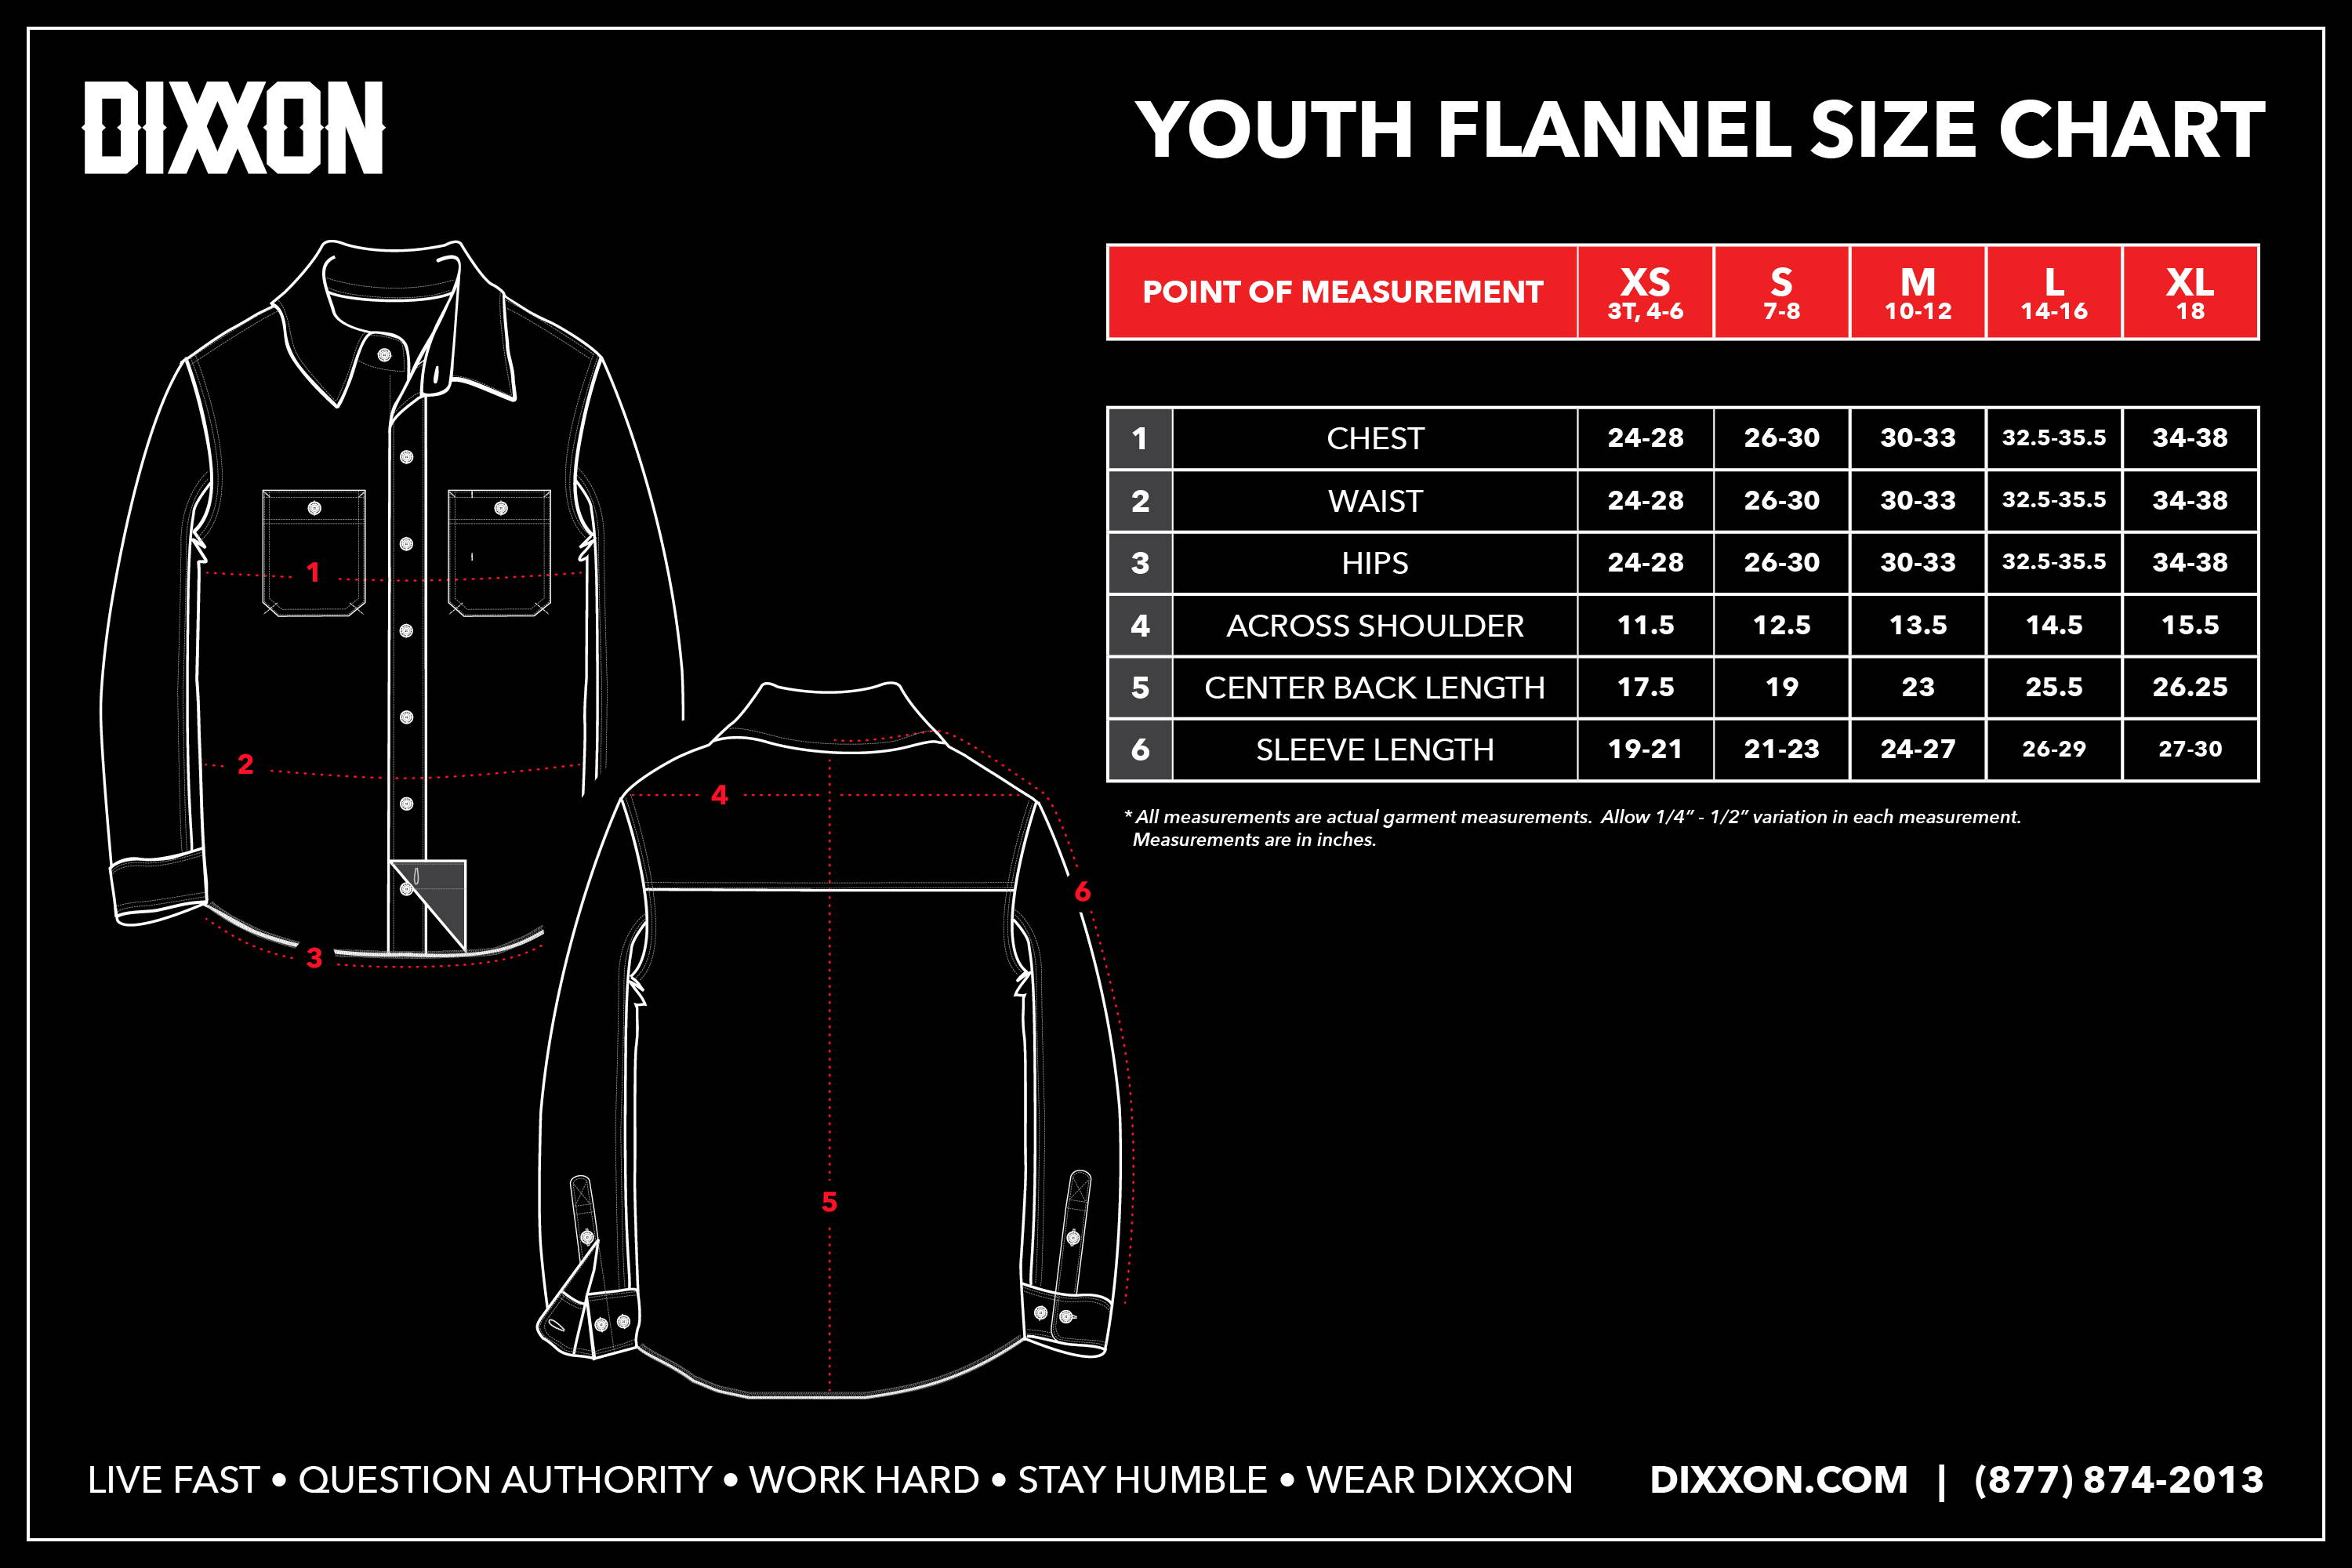 This size chart includes measurements for youth flannels, short sleeve bamboo shirts, and short sleeve party shirts.